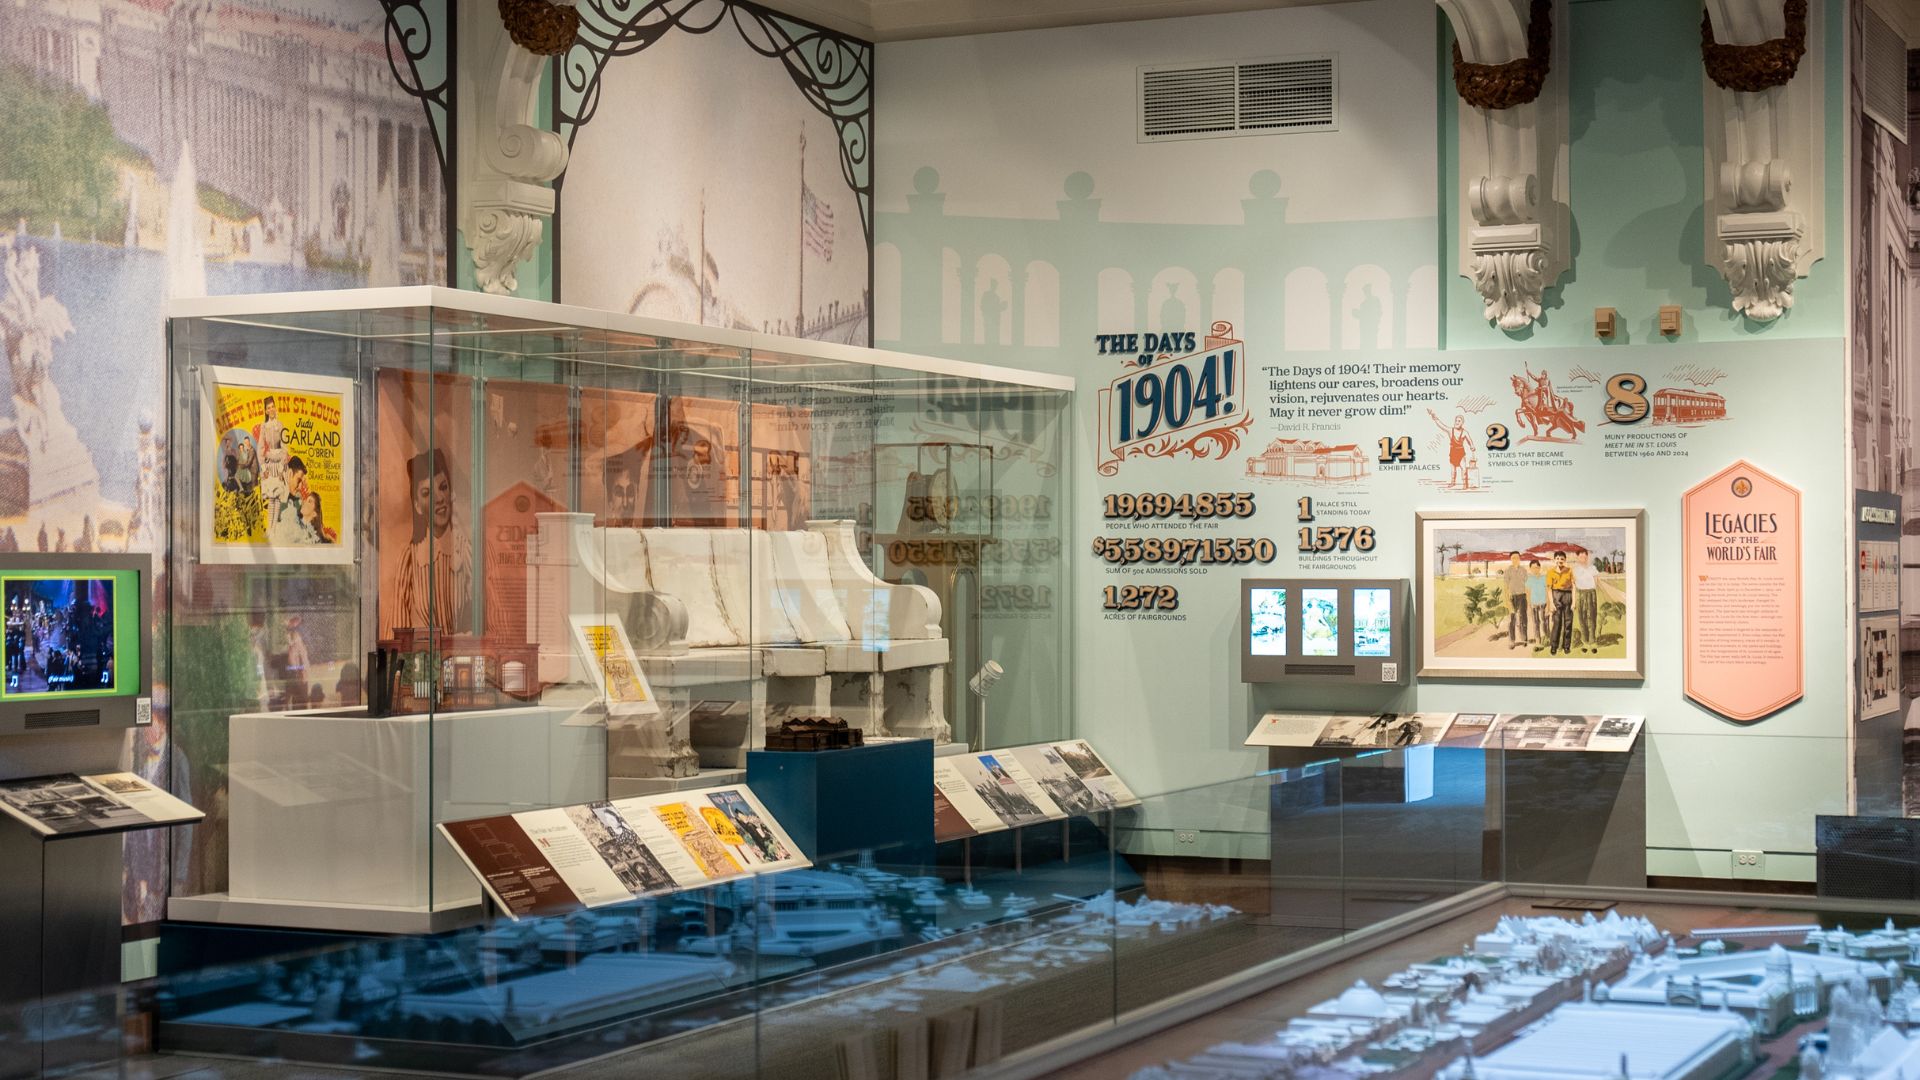 Some 200 artifacts are displayed in the new St. Louis World's Fair exhibit at the Missouri History Museum.